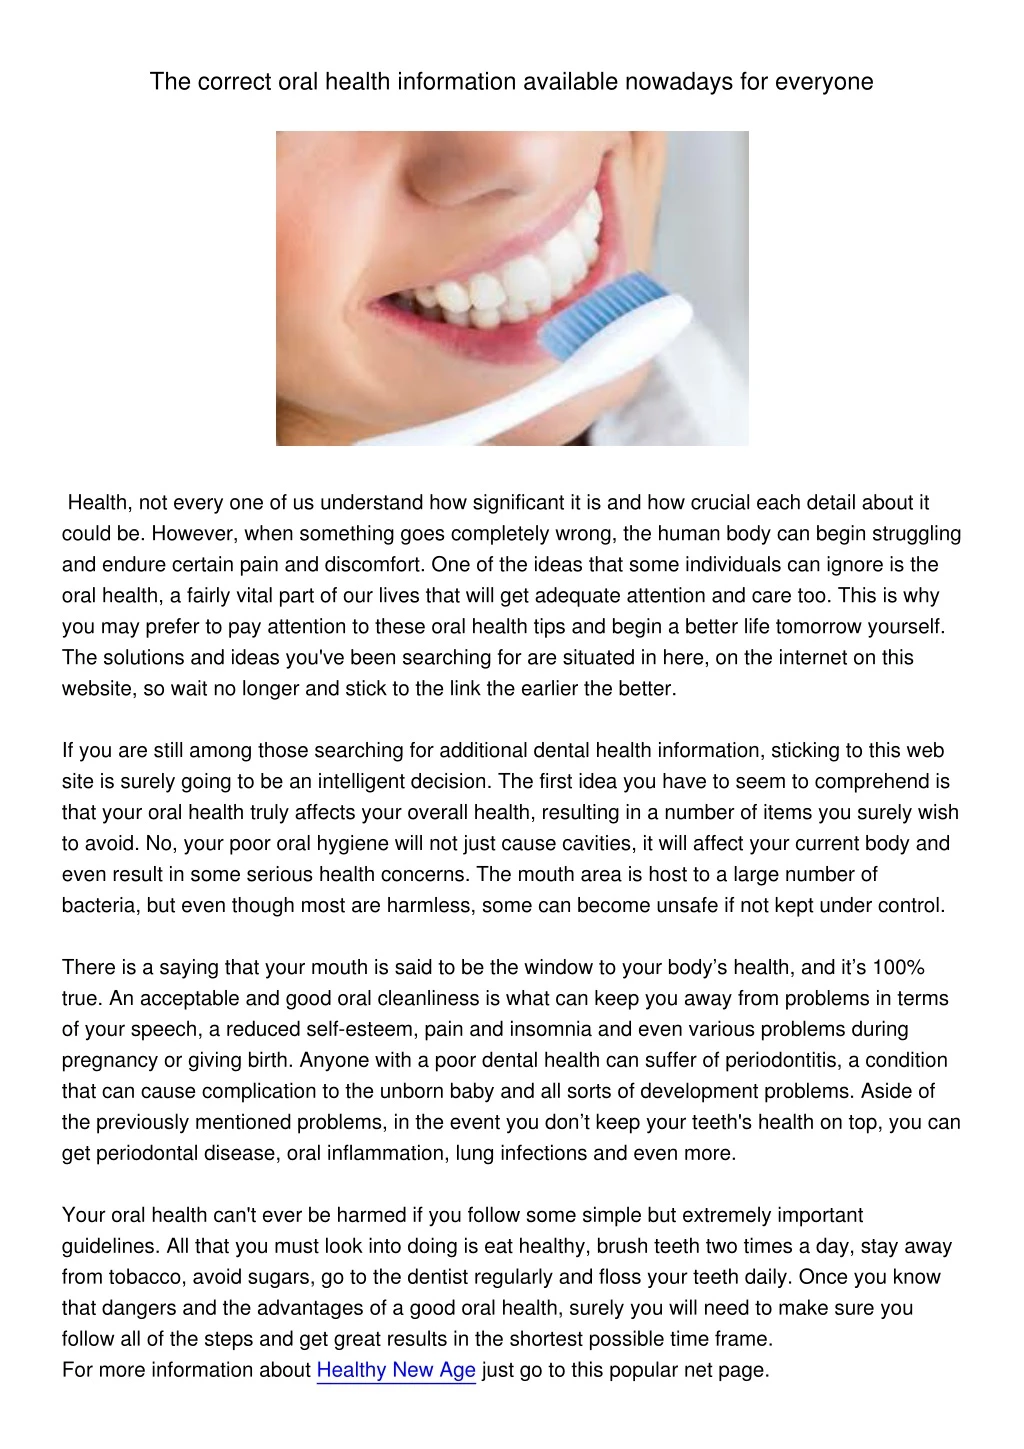 the correct oral health information available